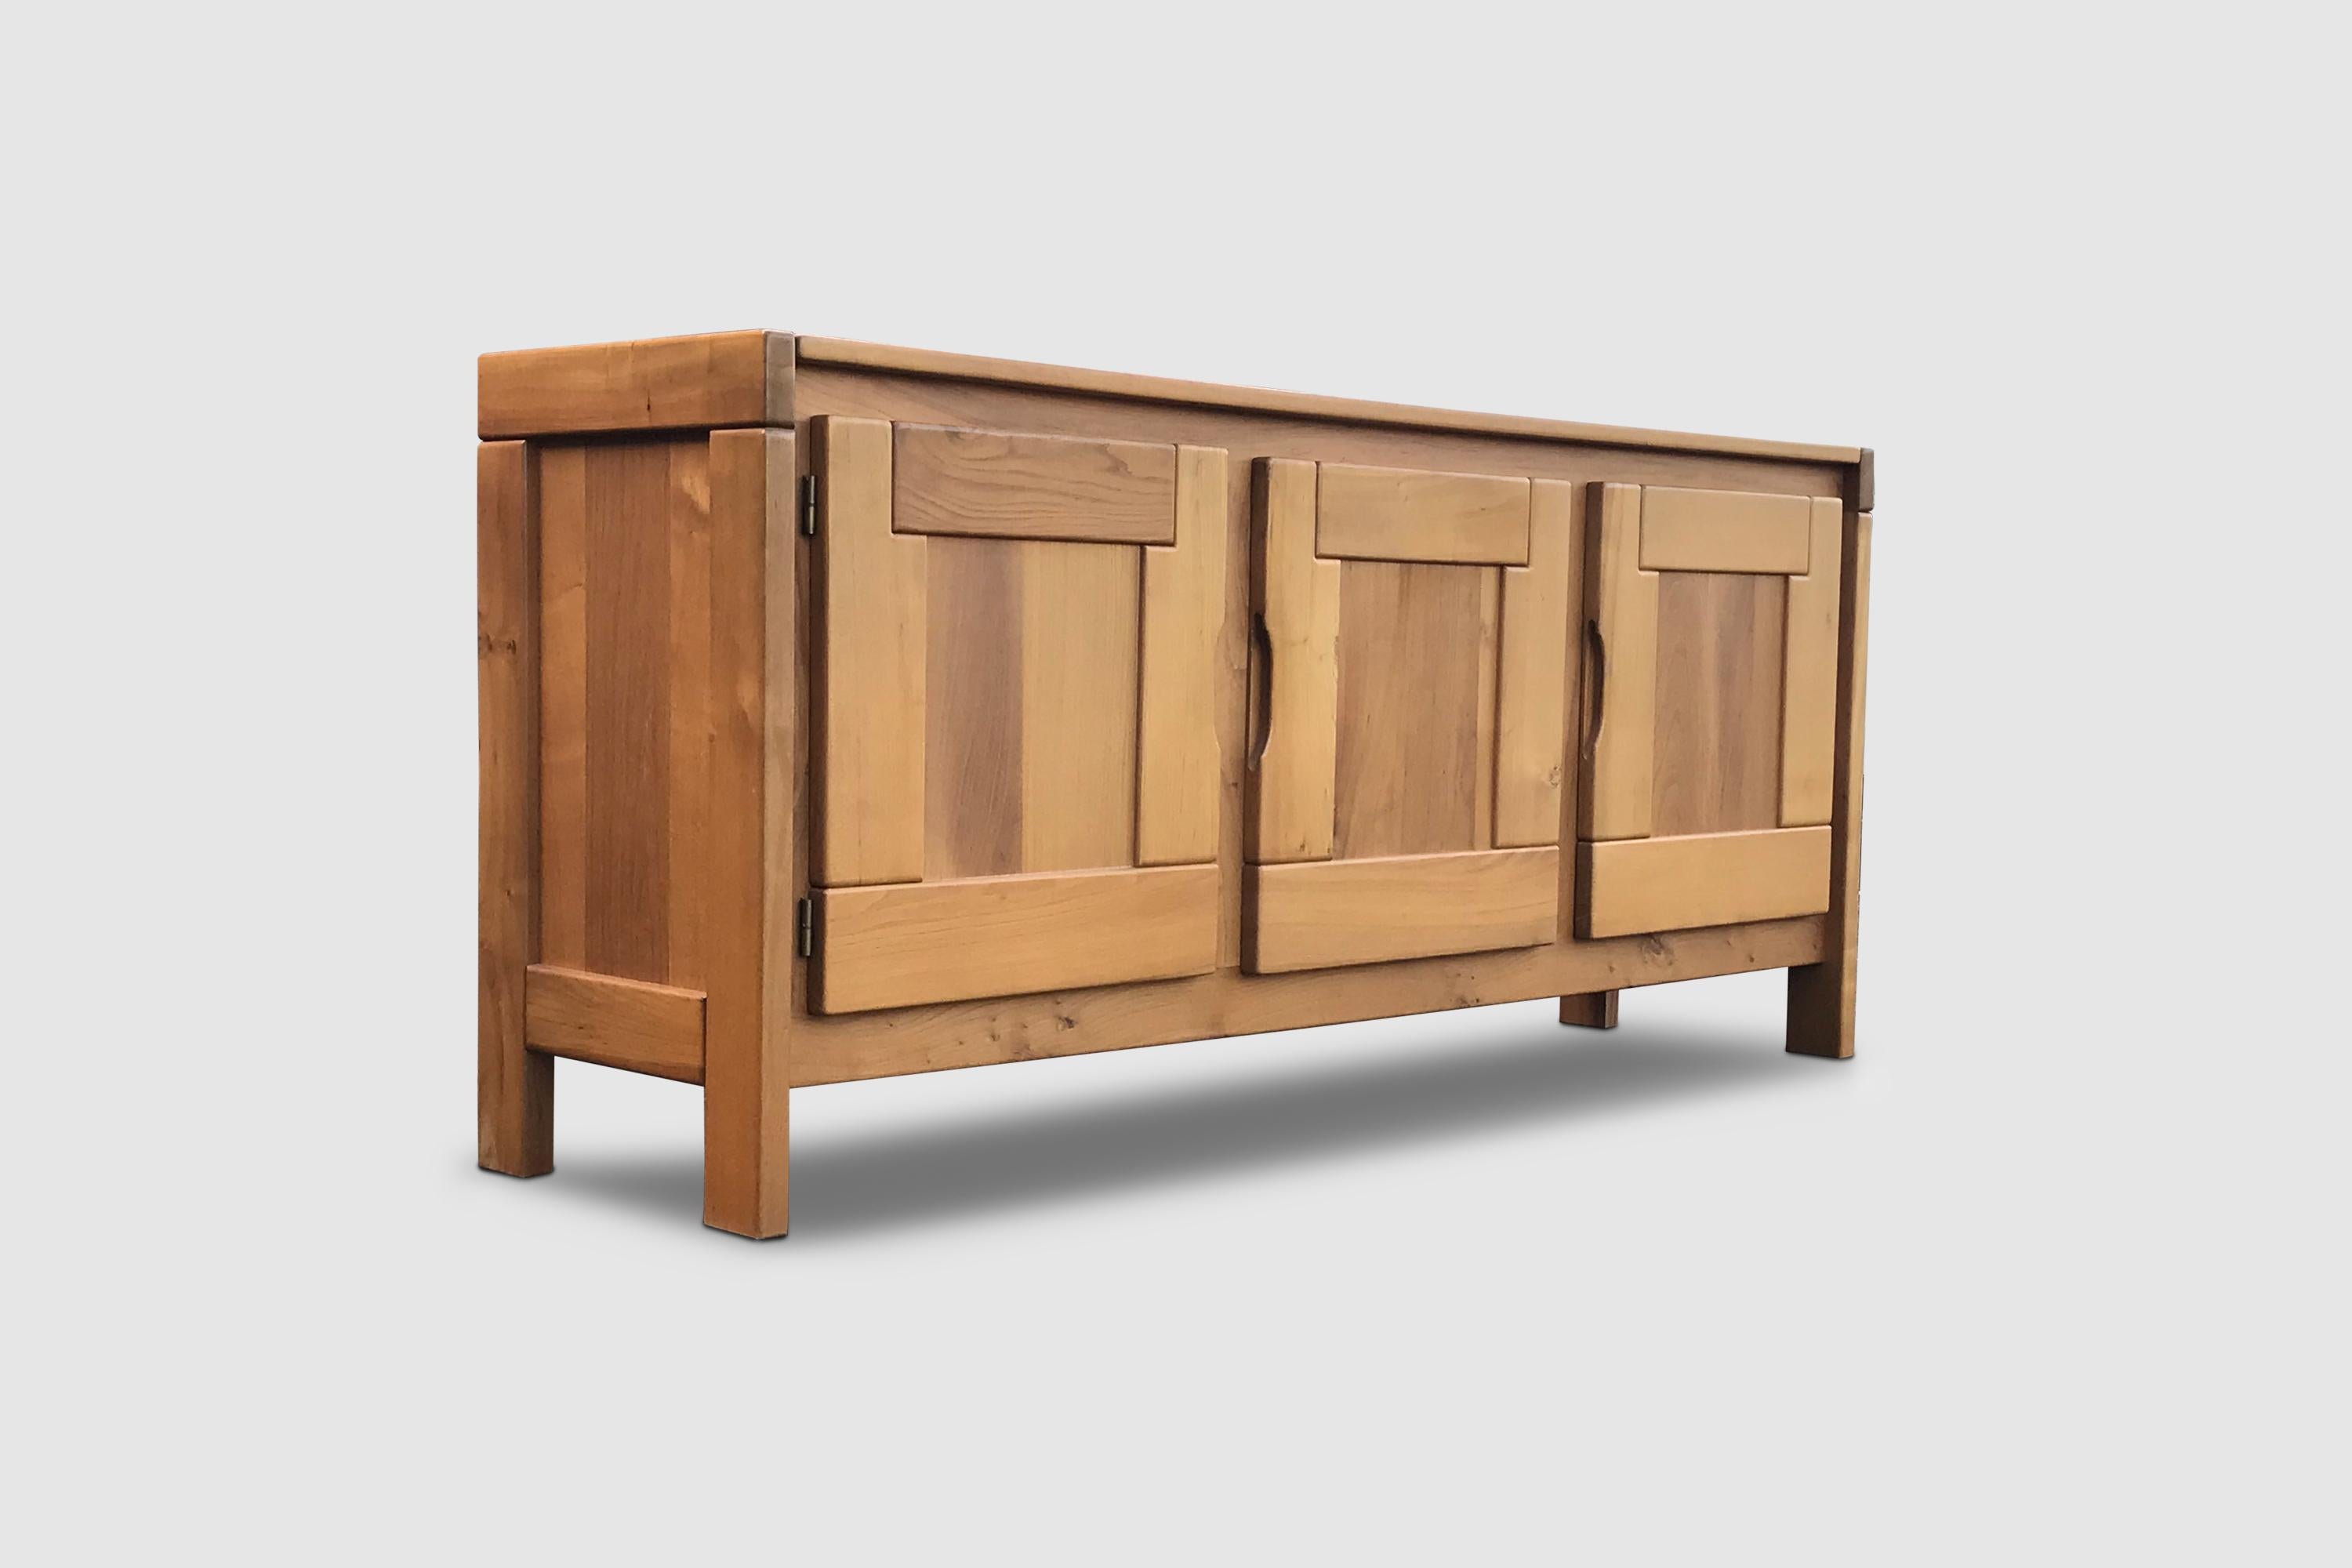 This sideboard is yet another great example of French modernist design. The sideboard is built out of solid elm.

The sideboard features 3 hinged drawers, accessing 5 compartment and 1 compartment with 2 sliding drawers.

Notice the beautifully